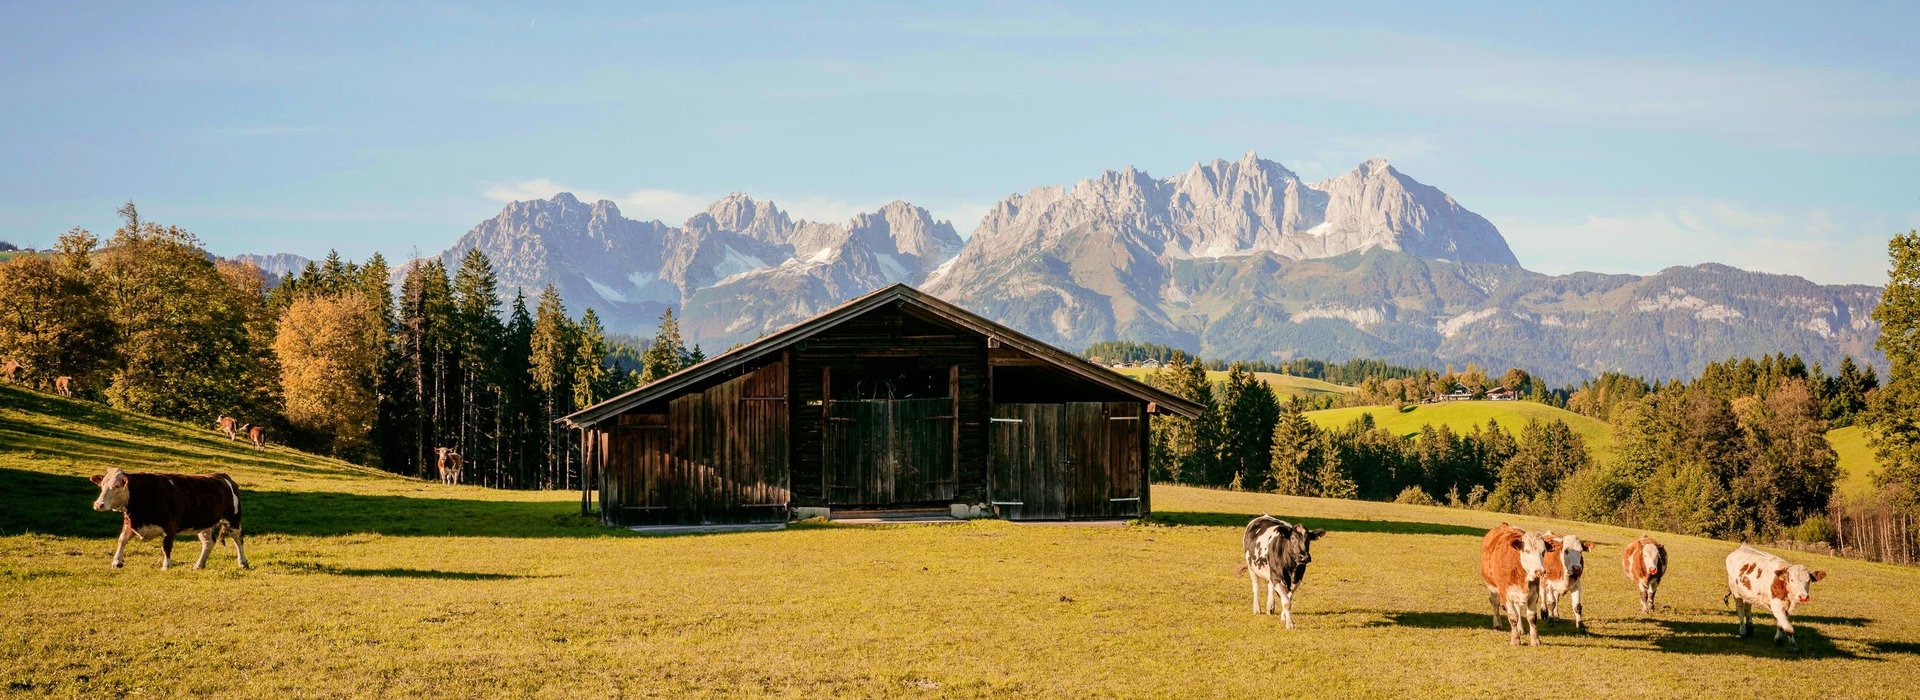 A hut on a lawn with cows with a mountain backdrop